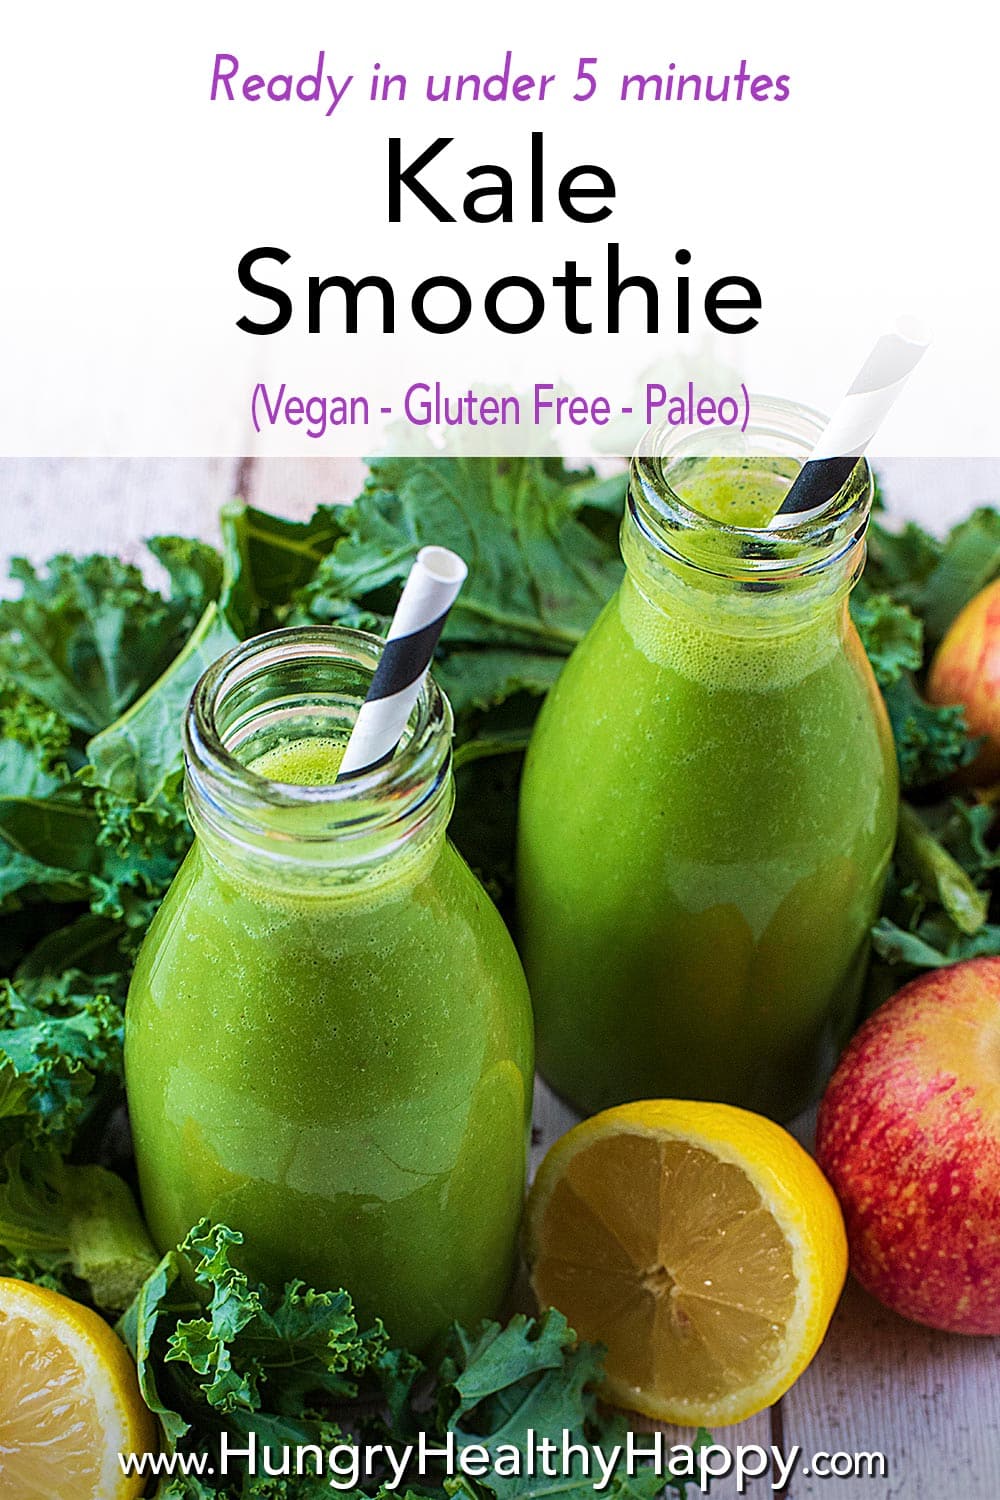 Kale Smoothie - Hungry Healthy Happy